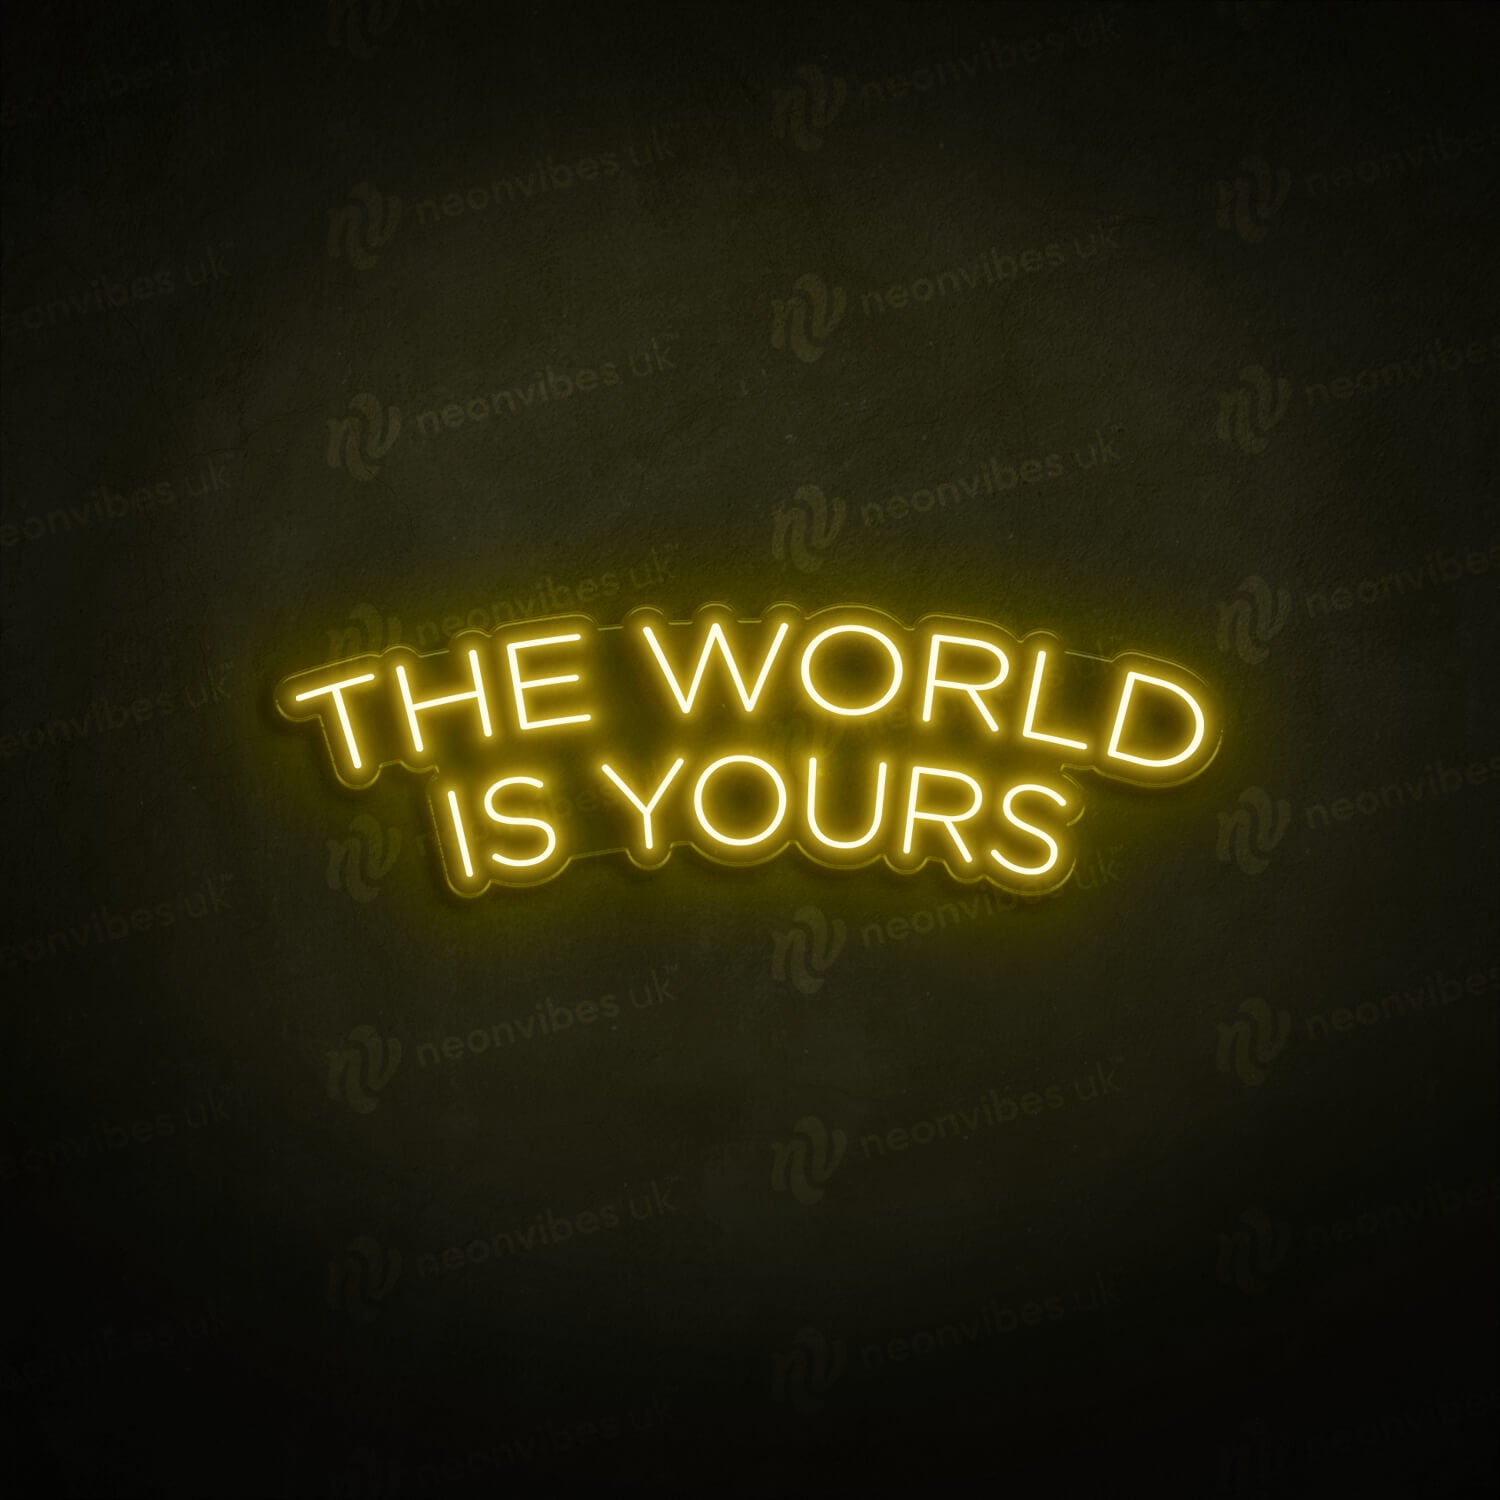 The word is yours neon sign